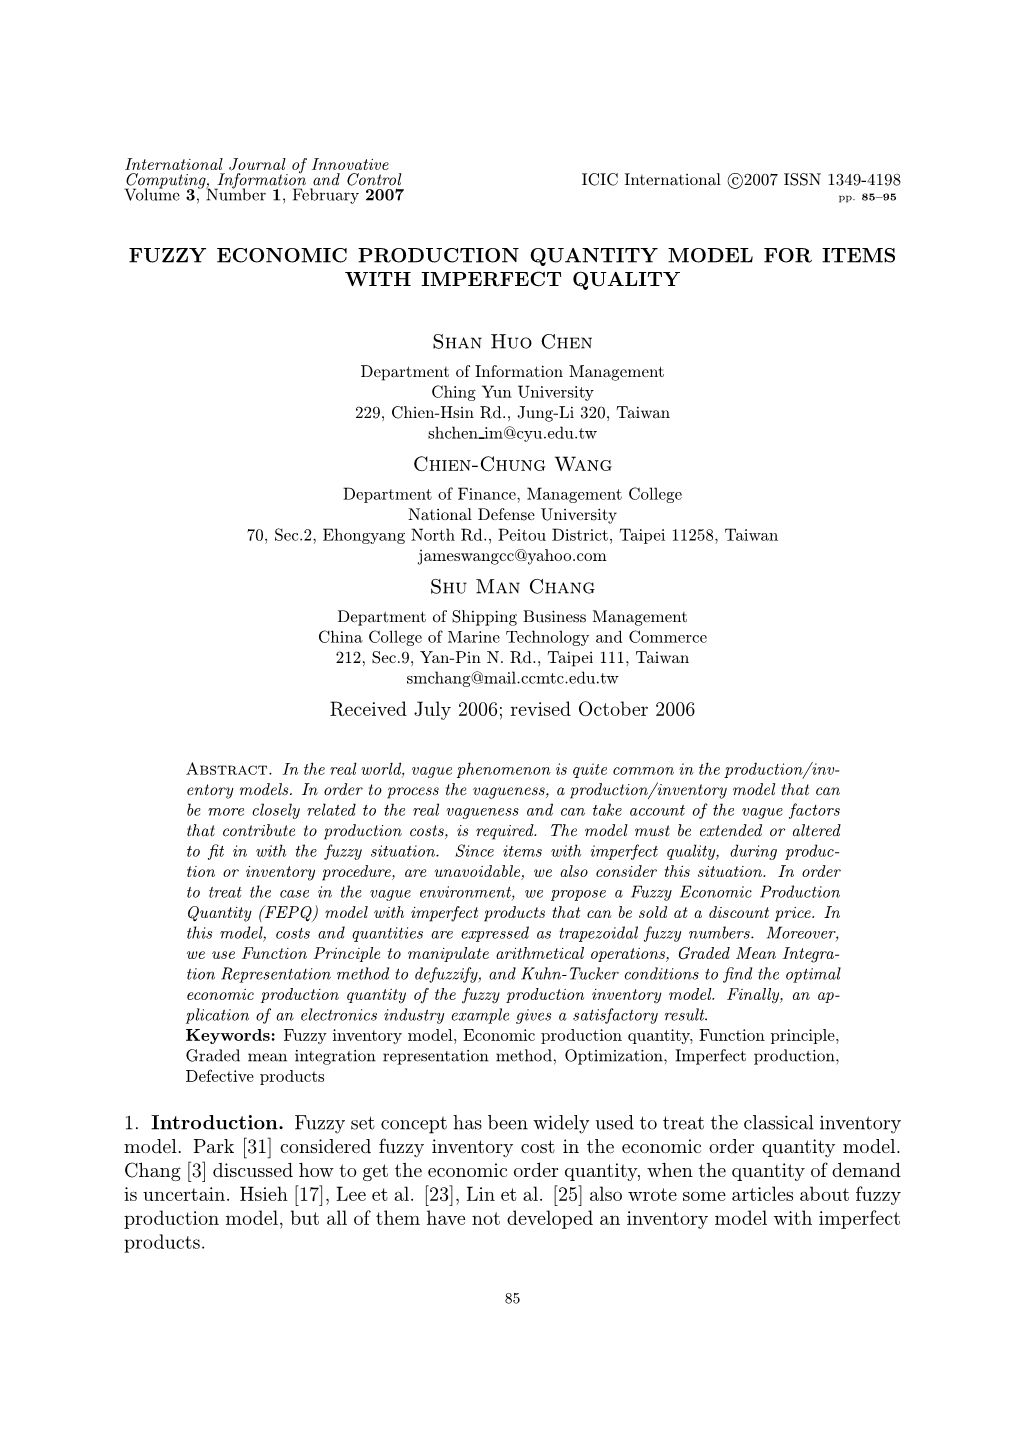 FUZZY ECONOMIC PRODUCTION QUANTITY MODEL for ITEMS with IMPERFECT QUALITY Shan Huo Chen Chien-Chung Wang Shu Man Chang Received